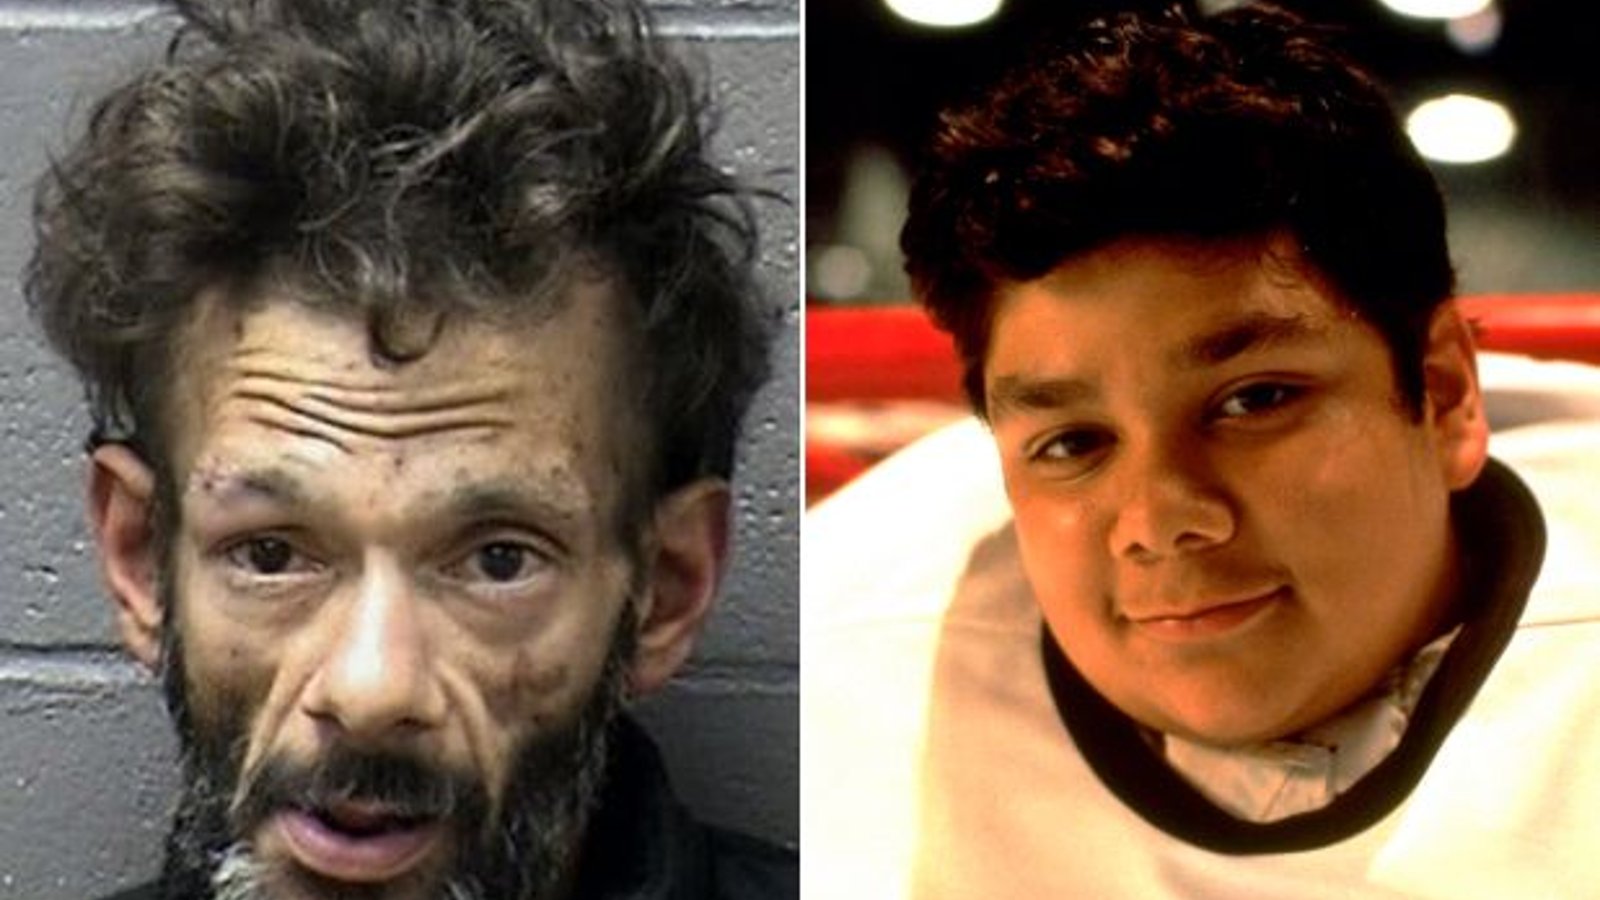 Friend attempting to raise funds to pay for former Mighty Ducks actor Shaun Weiss's treatment